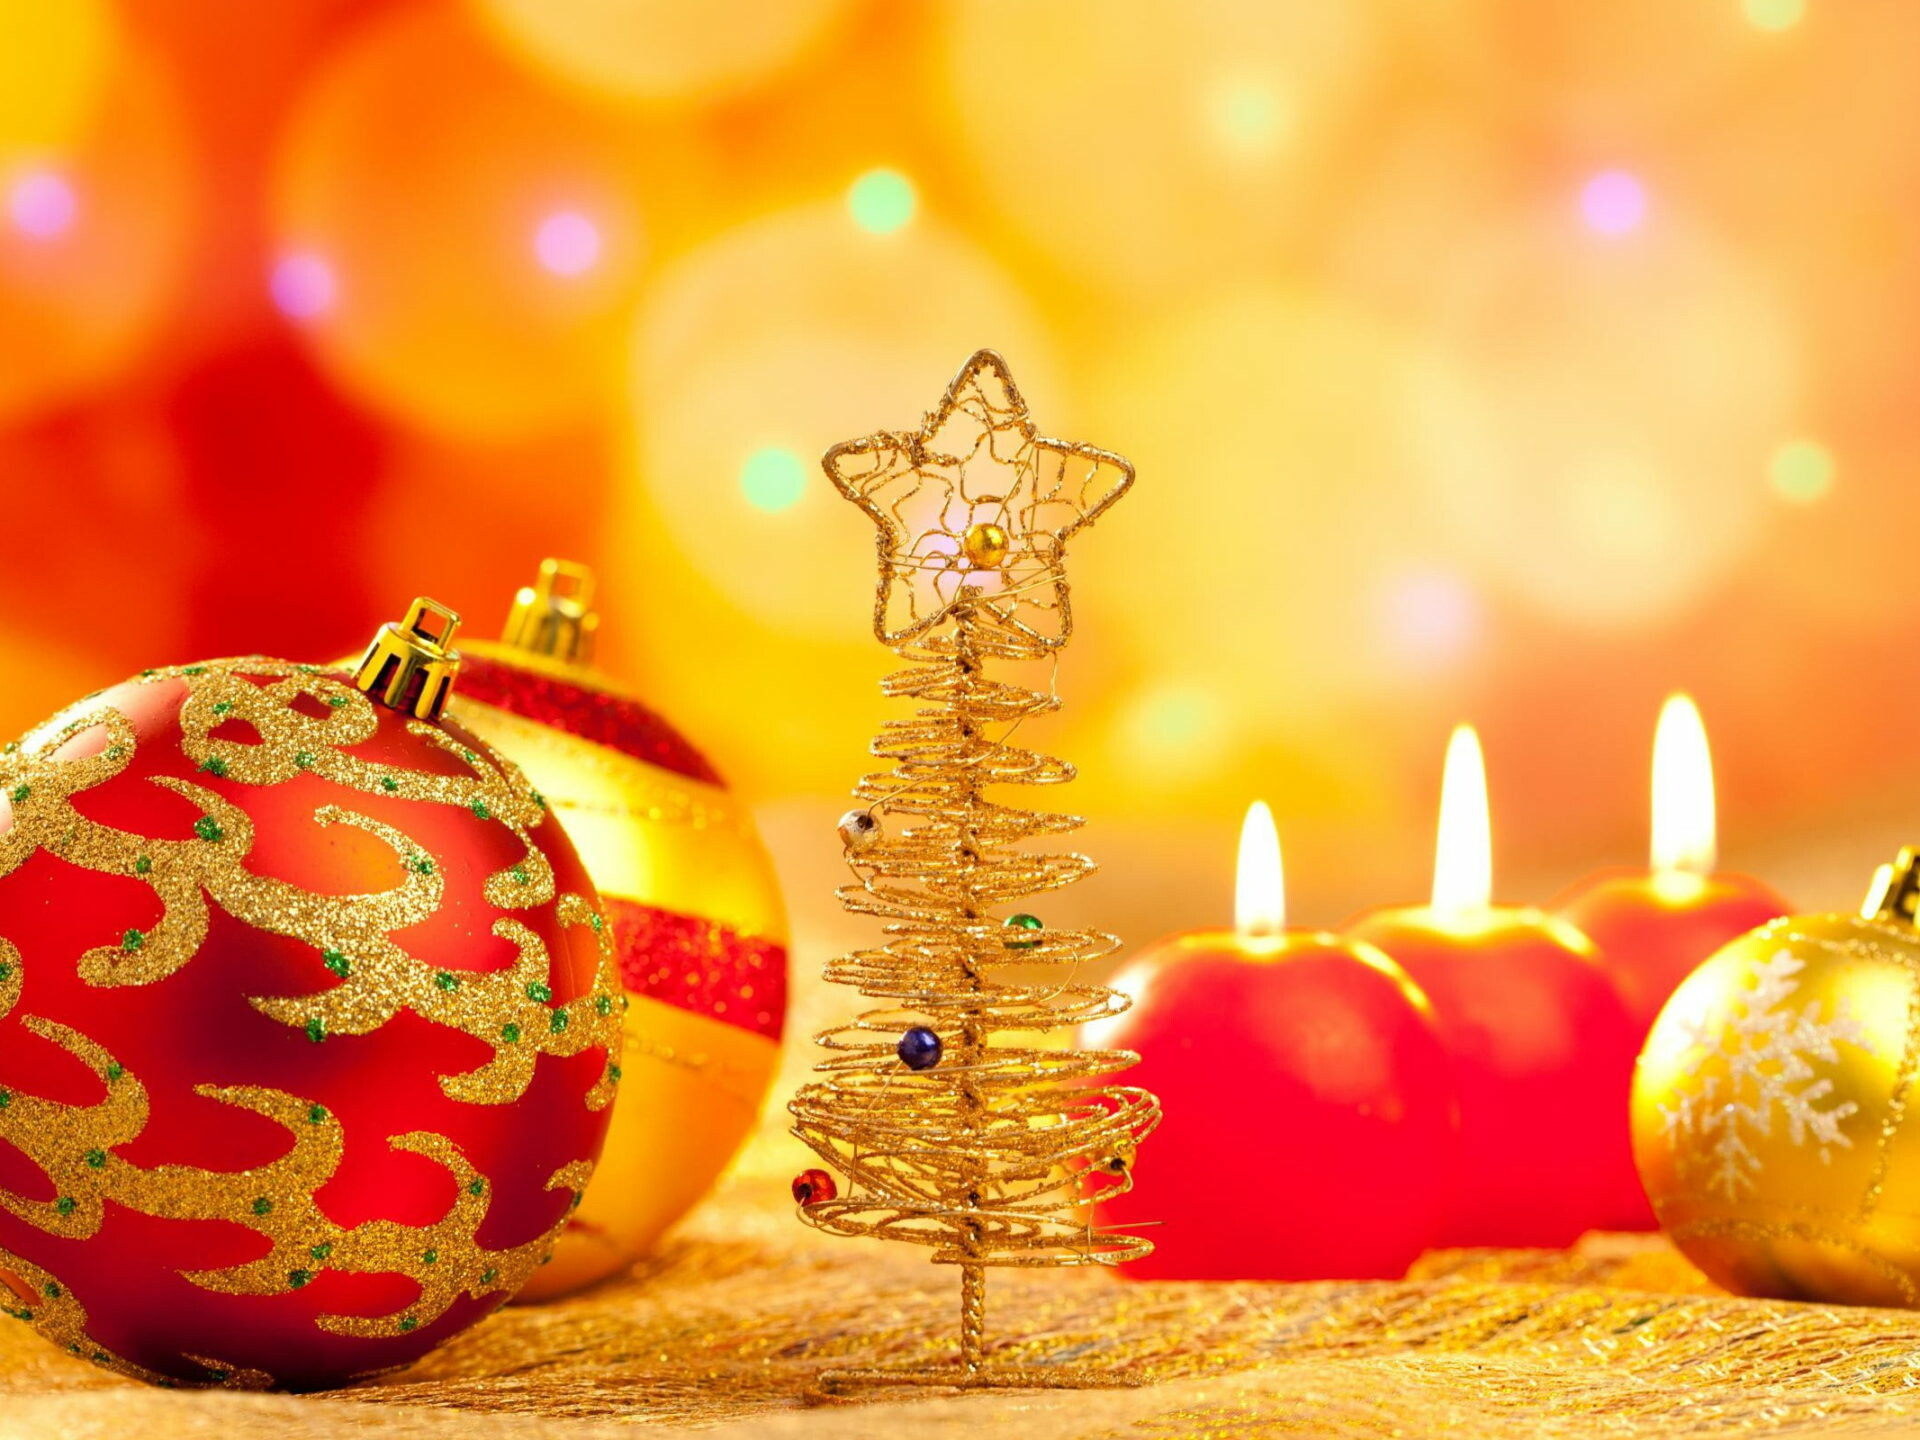 Decorations: Happy New Year, Christmas ornaments, Candles, Toys. 1920x1440 HD Background.